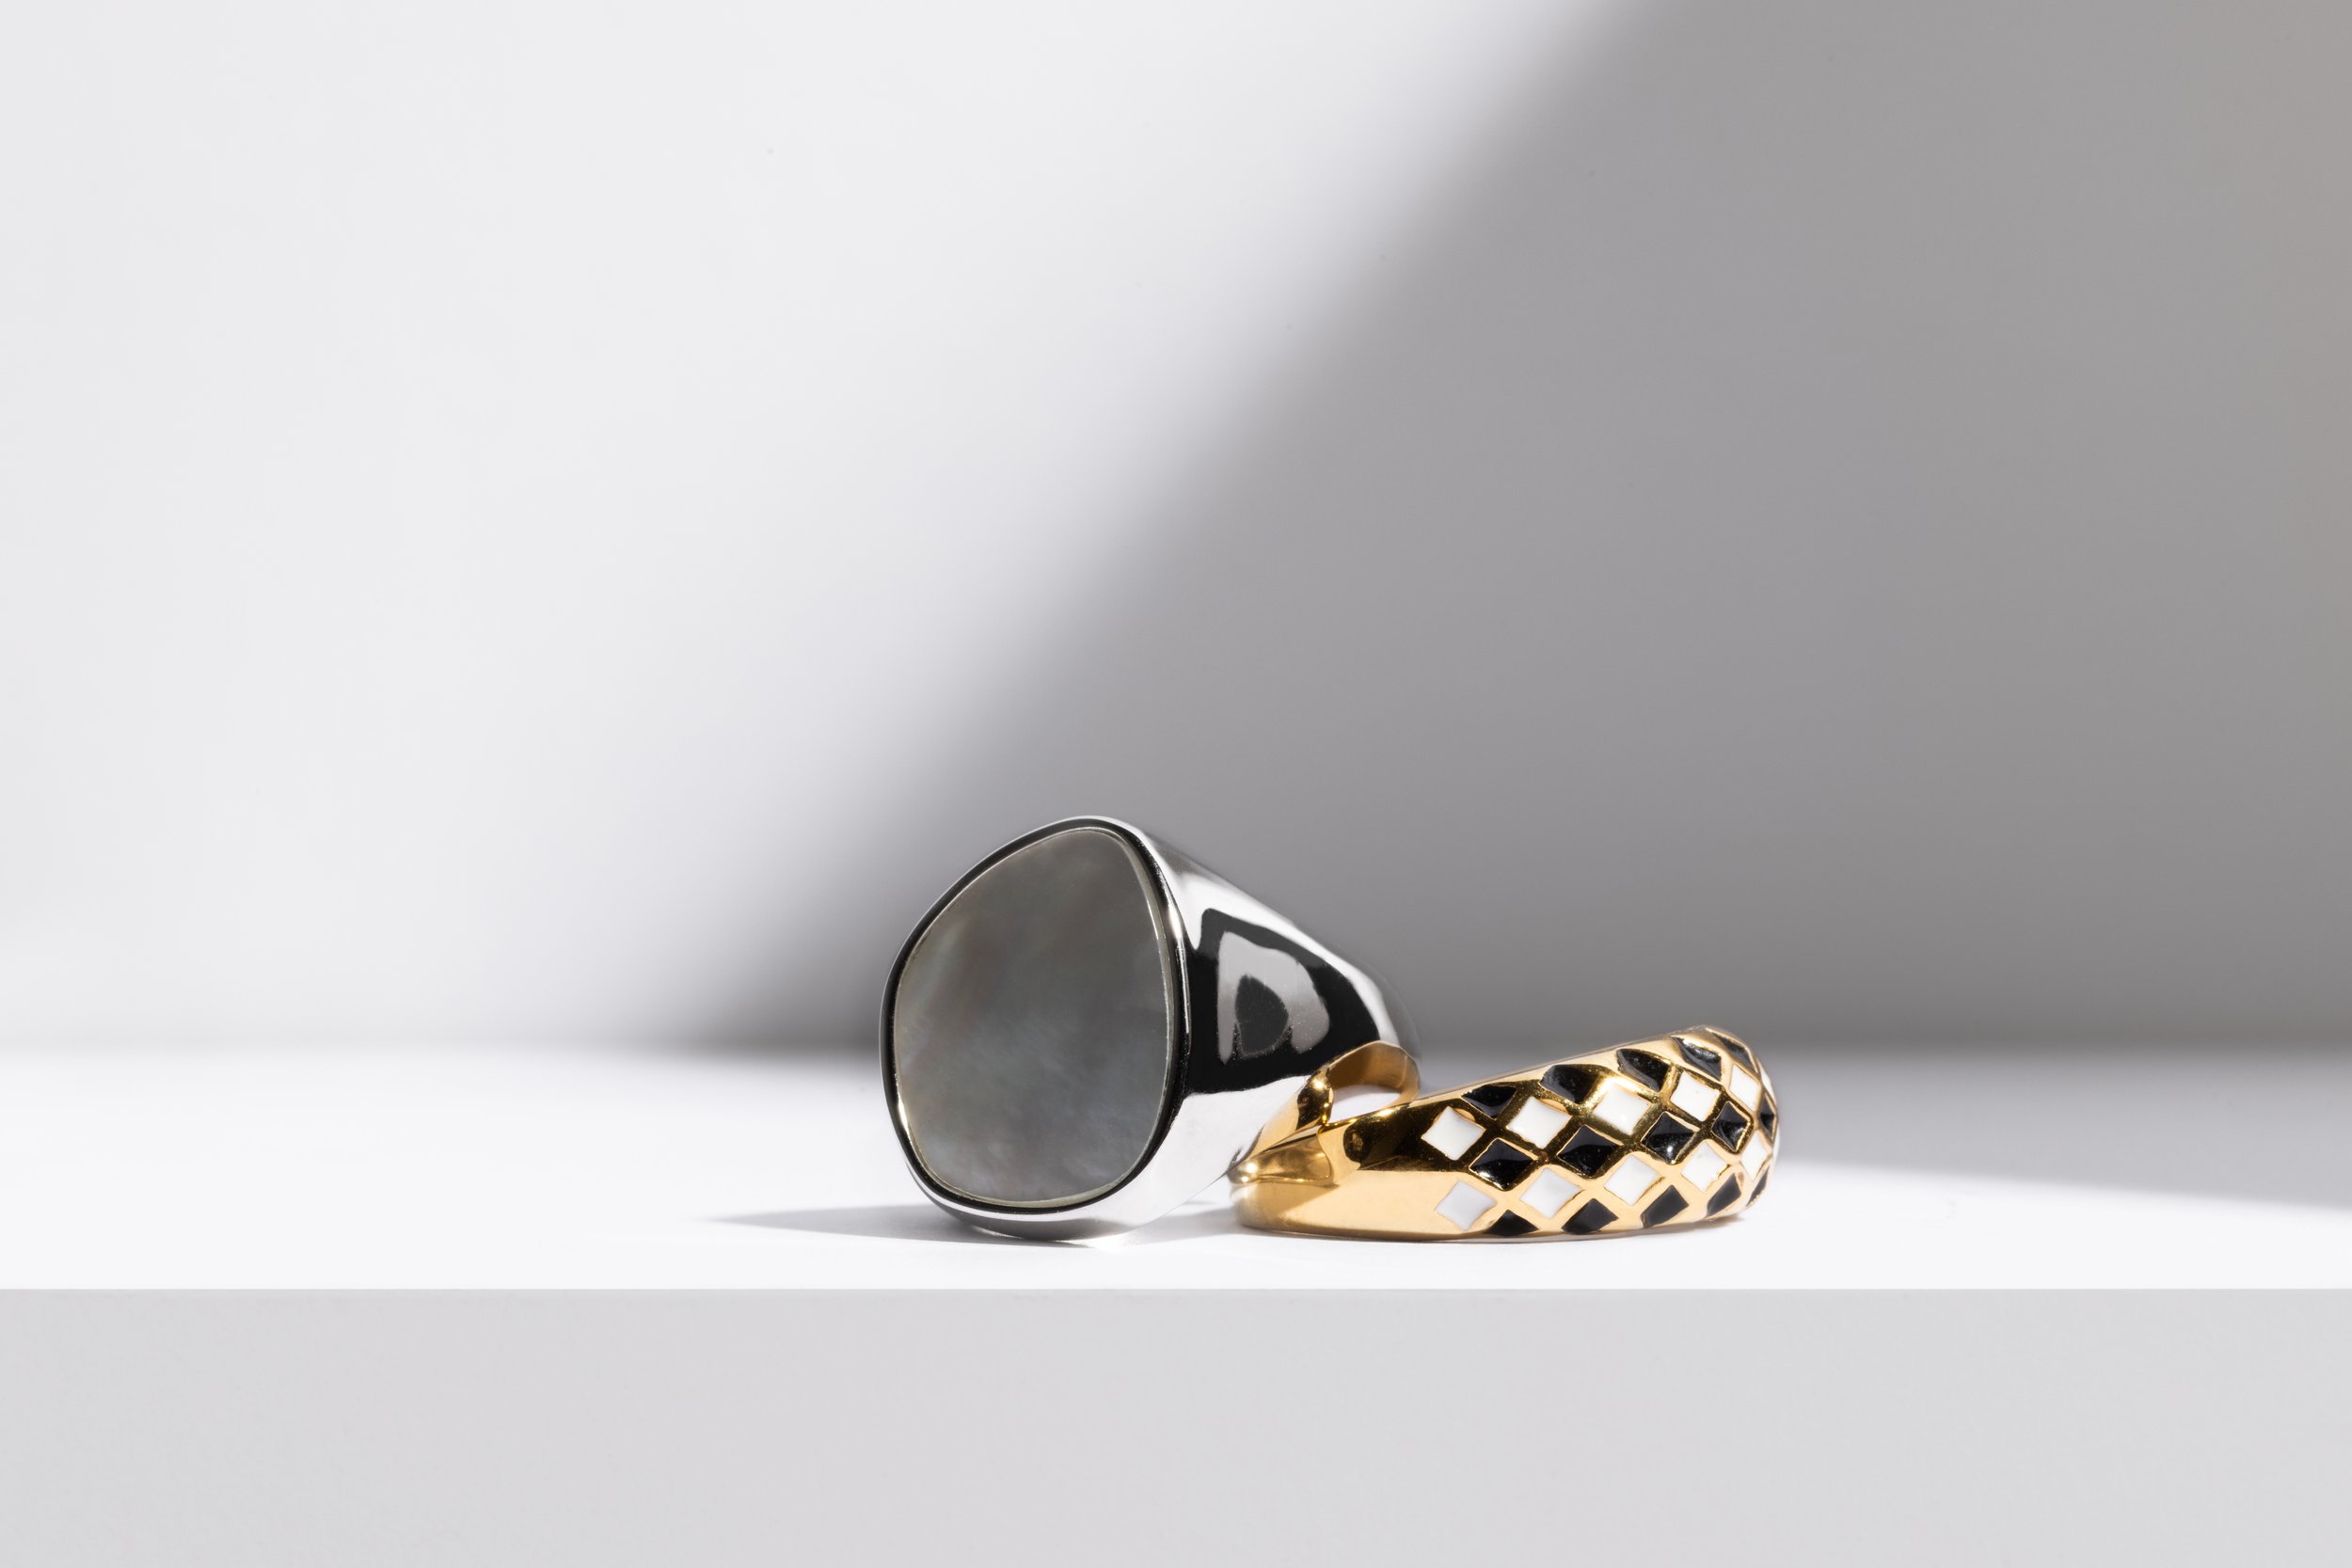 product photography inspiration for jewelry brands.jpg